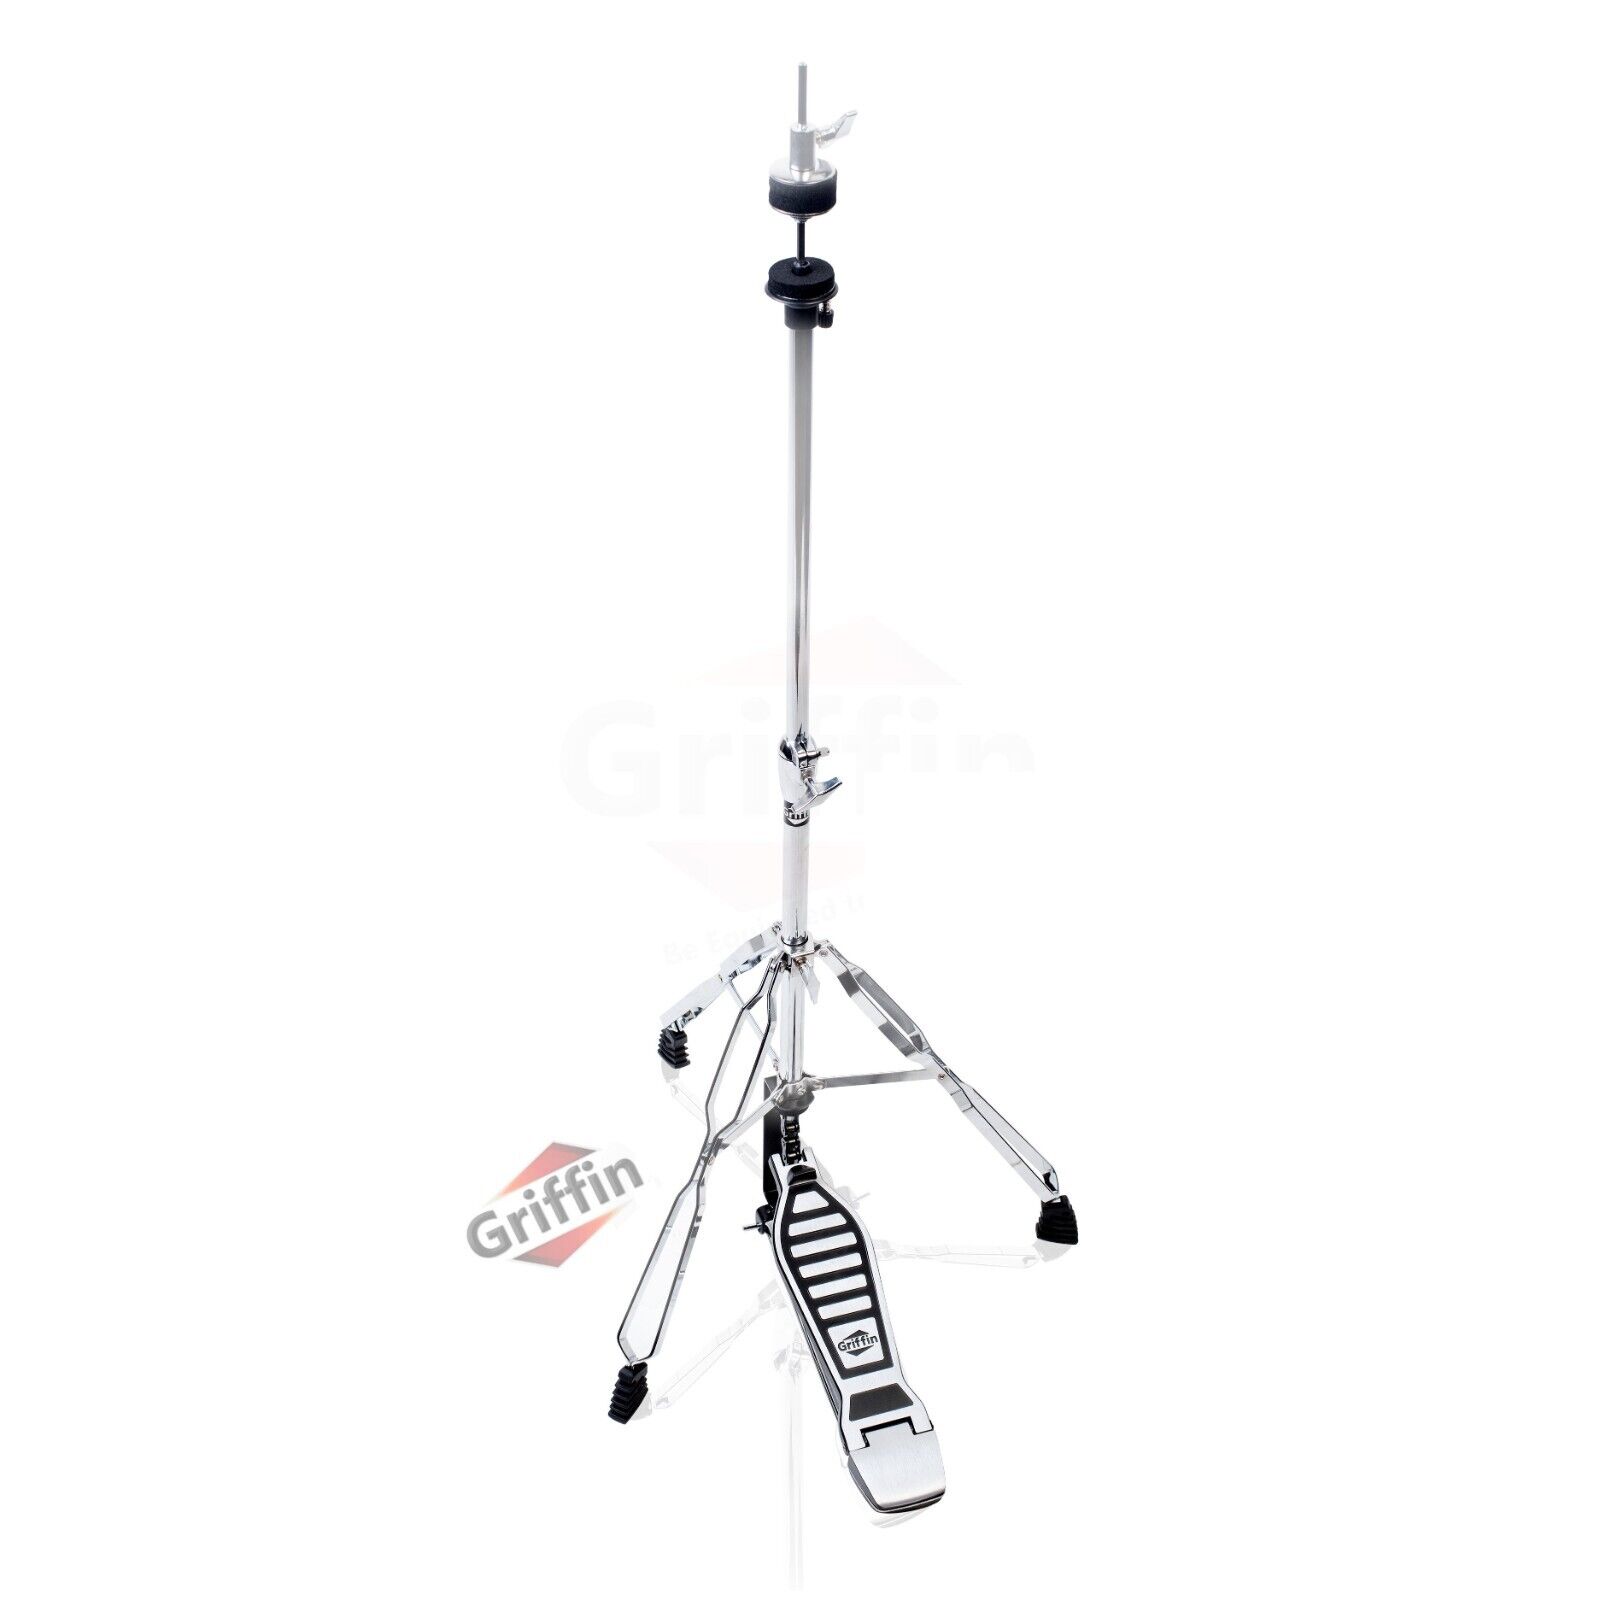 GRIFFIN Hi-Hat Stand | HiHat Cymbal Hardware Drum Pedal Holder Percussion Mount Griffin SM-LG-H80